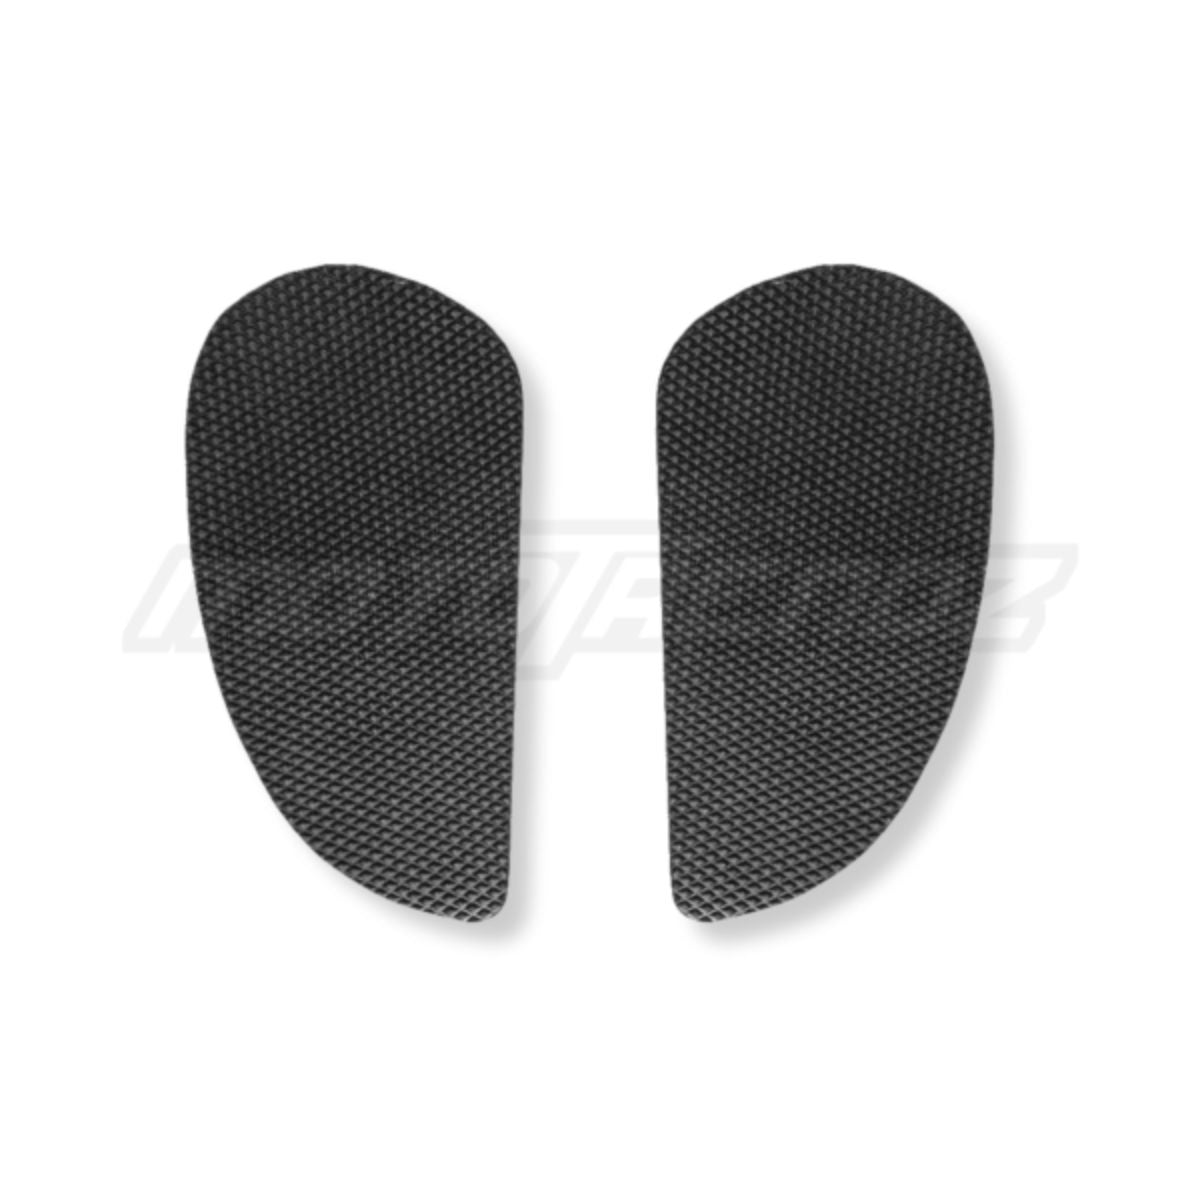 Traction Pads for Royal Enfield Interceptor 650 4